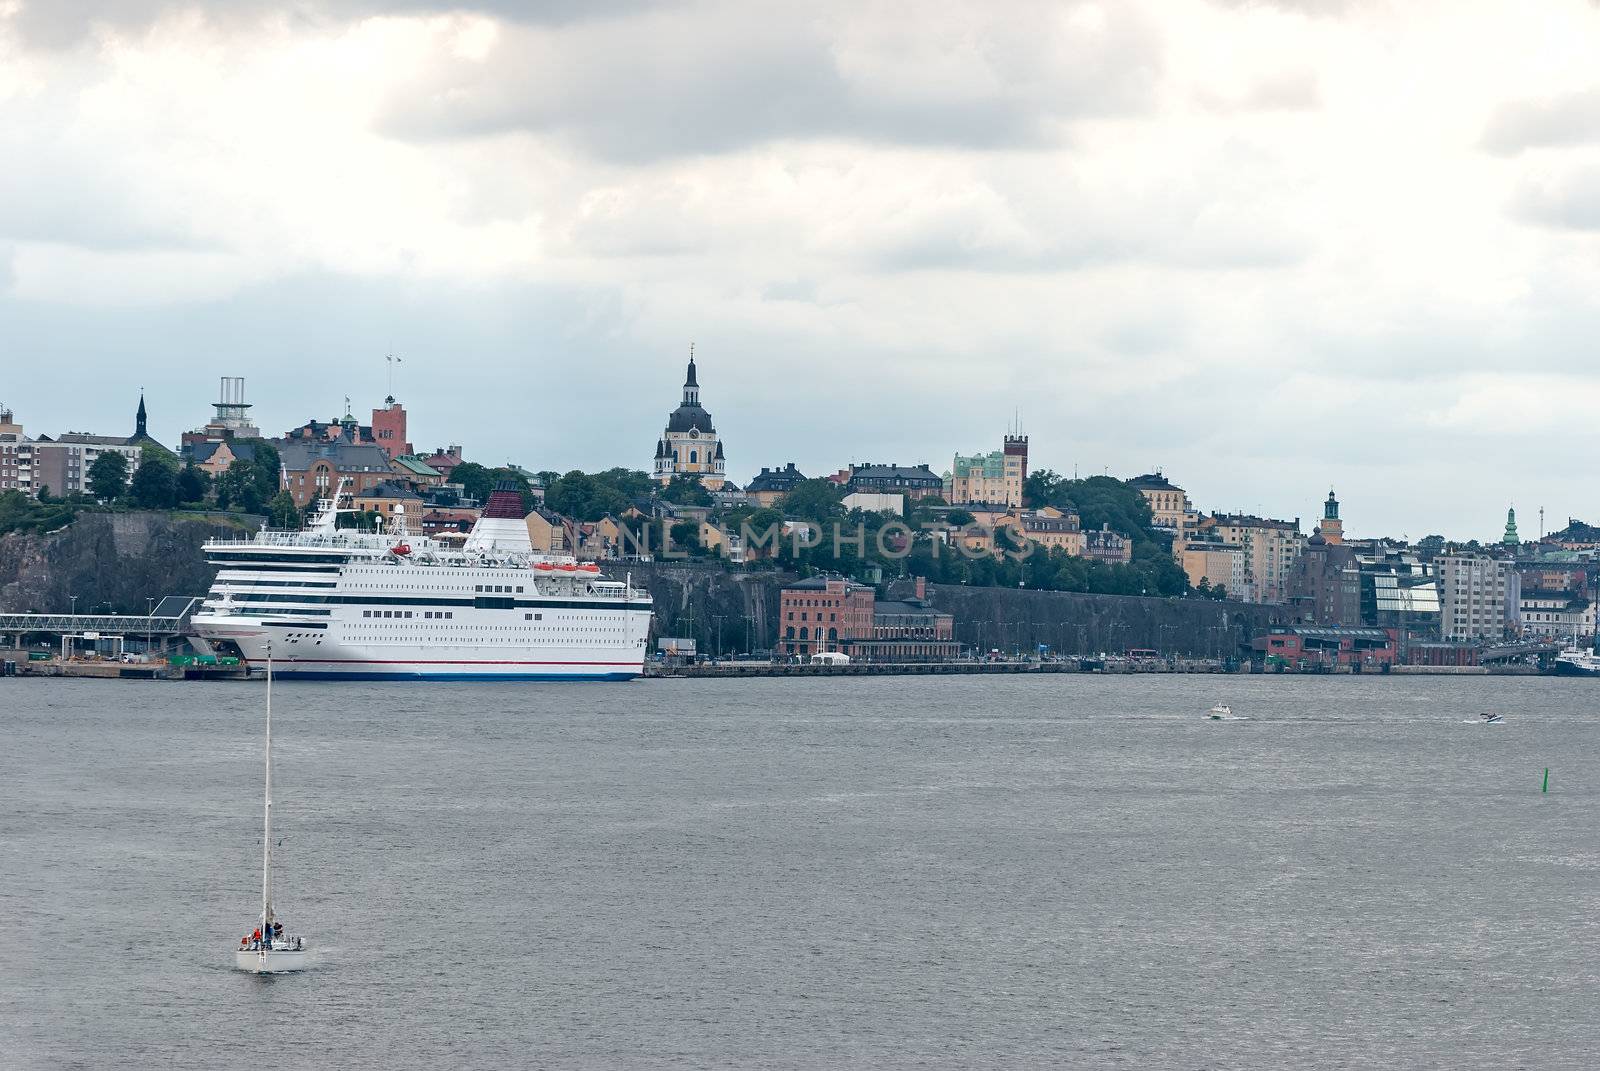 Cruise ship in the port of Stockholm. Sweden.